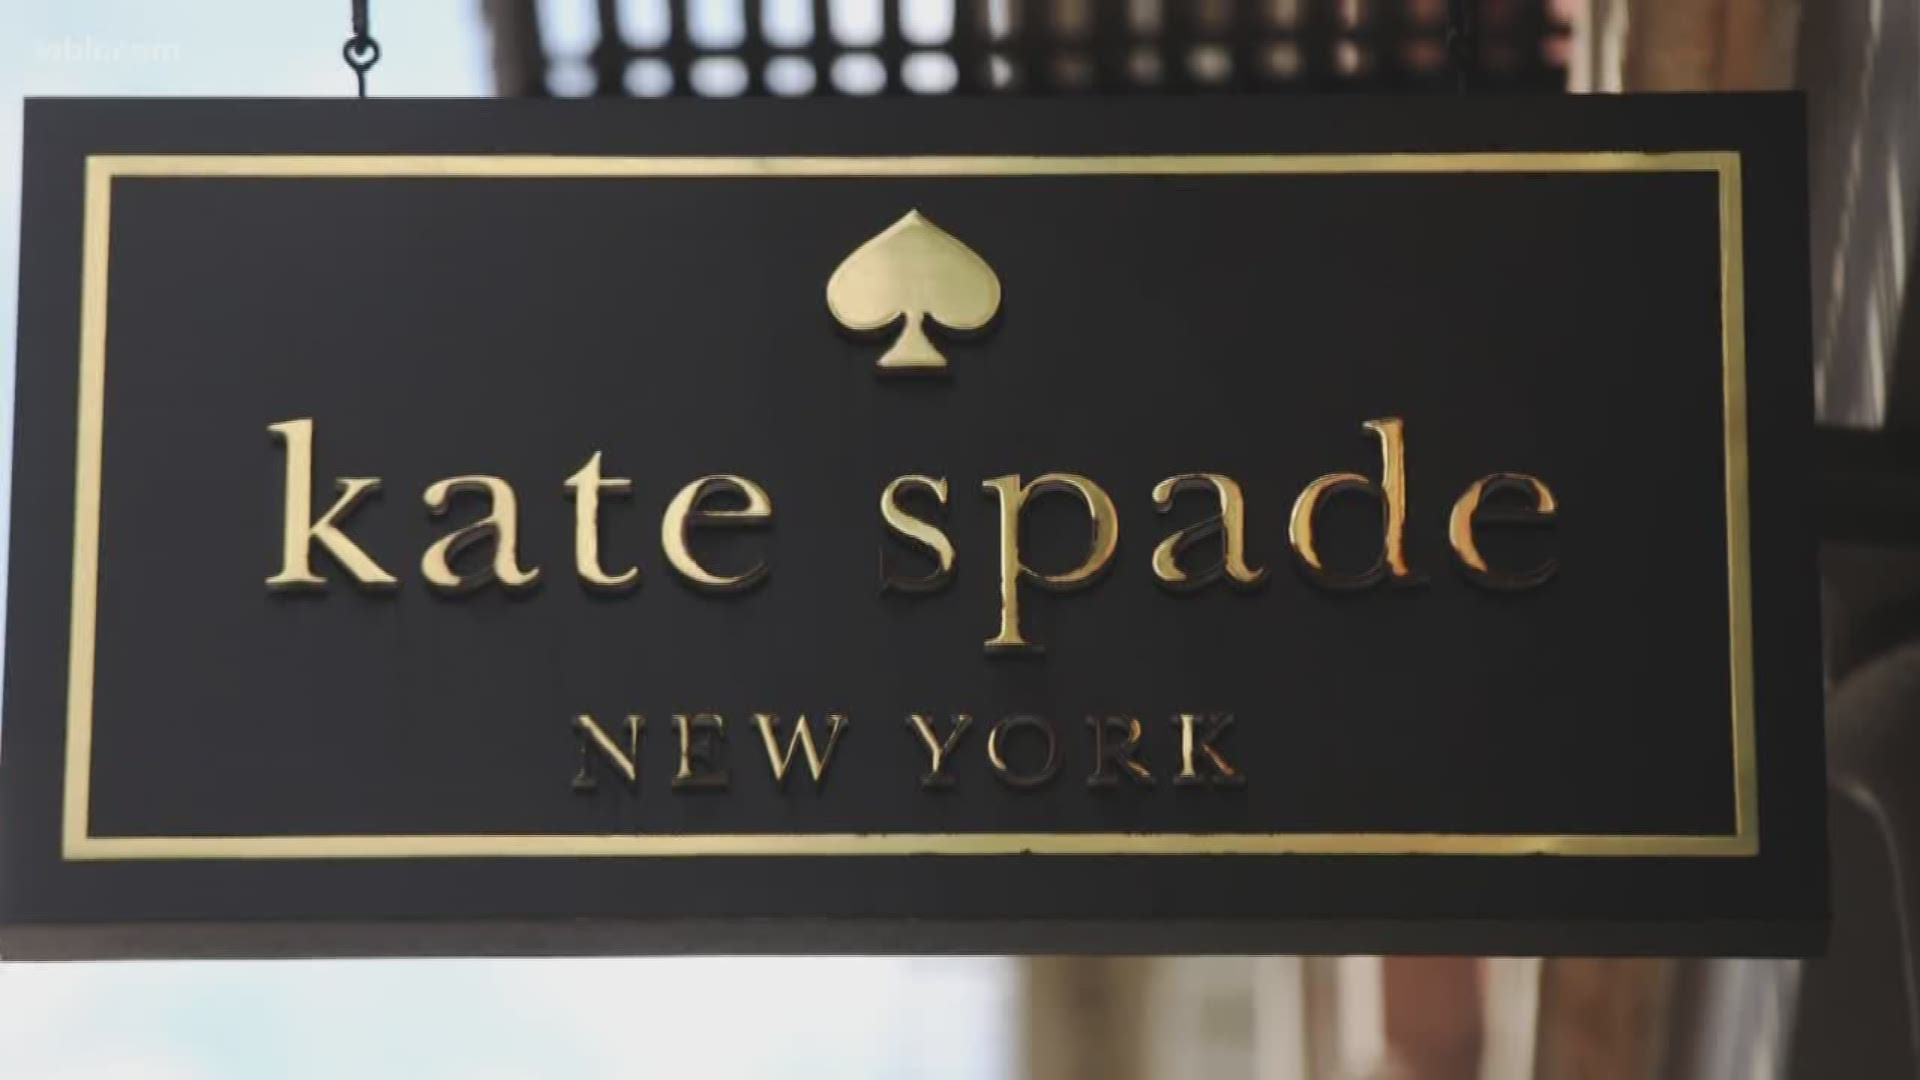 Kate Spade's death has given suicide experts another reason to make sure people know there is help available if you are having suicidal thoughts.